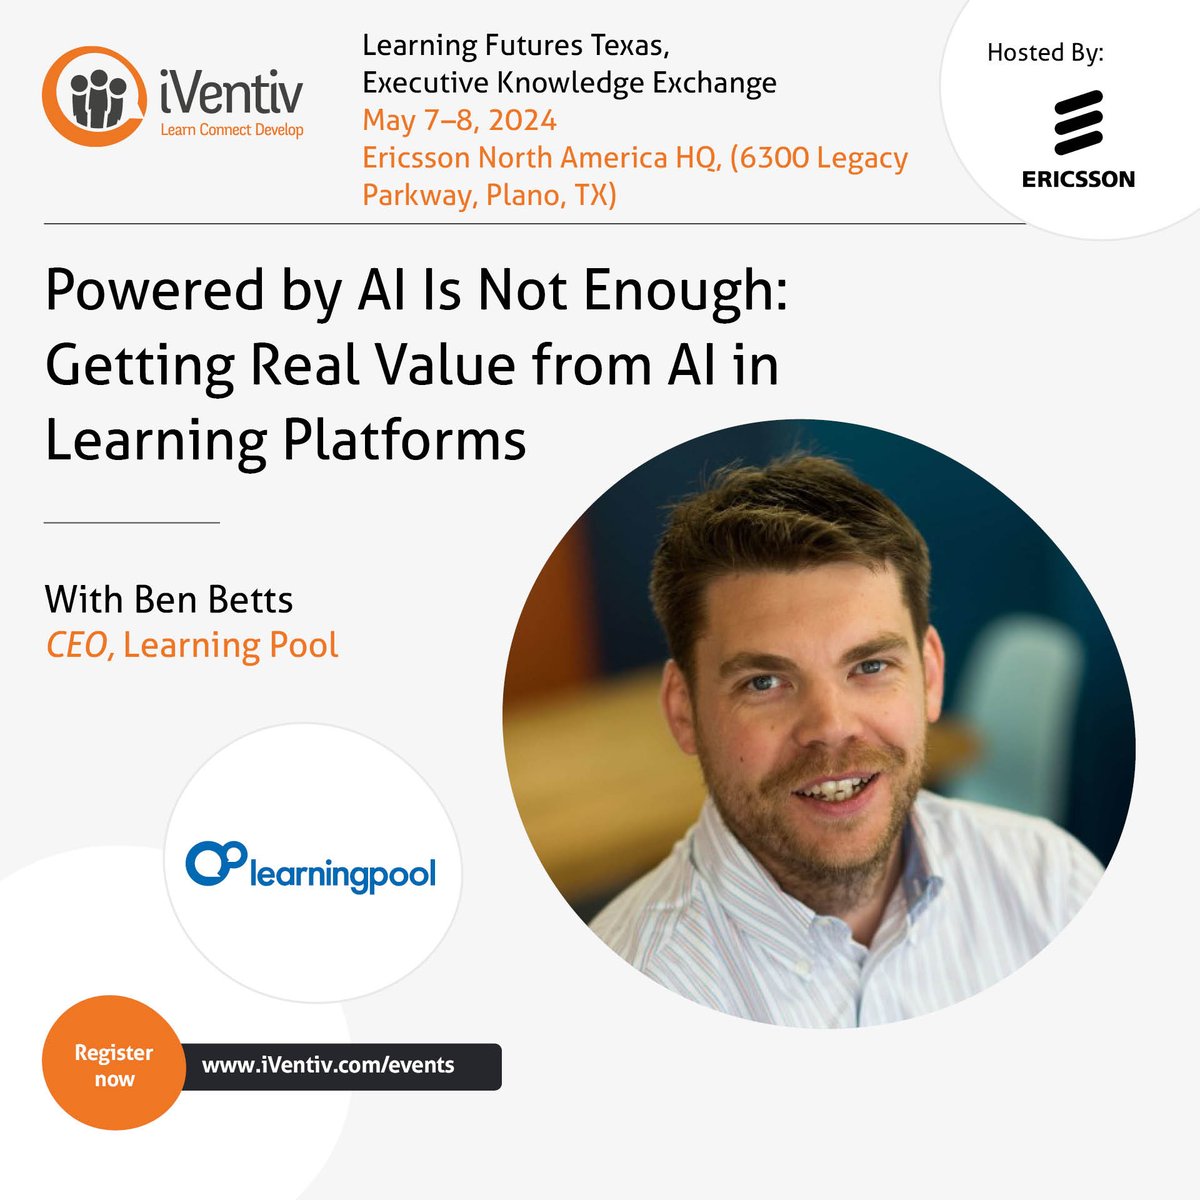 Attending Learning Futures Texas on May 7-8th? 👀 Join Learning Pool's CEO, Ben Betts, as he discusses how you can get real value from AI in learning platforms. 🖥️ You can register for the event here 👉 hubs.ly/Q02tT-ZK0 #Learninganddevelopment #AI #LearningFuturesTexas